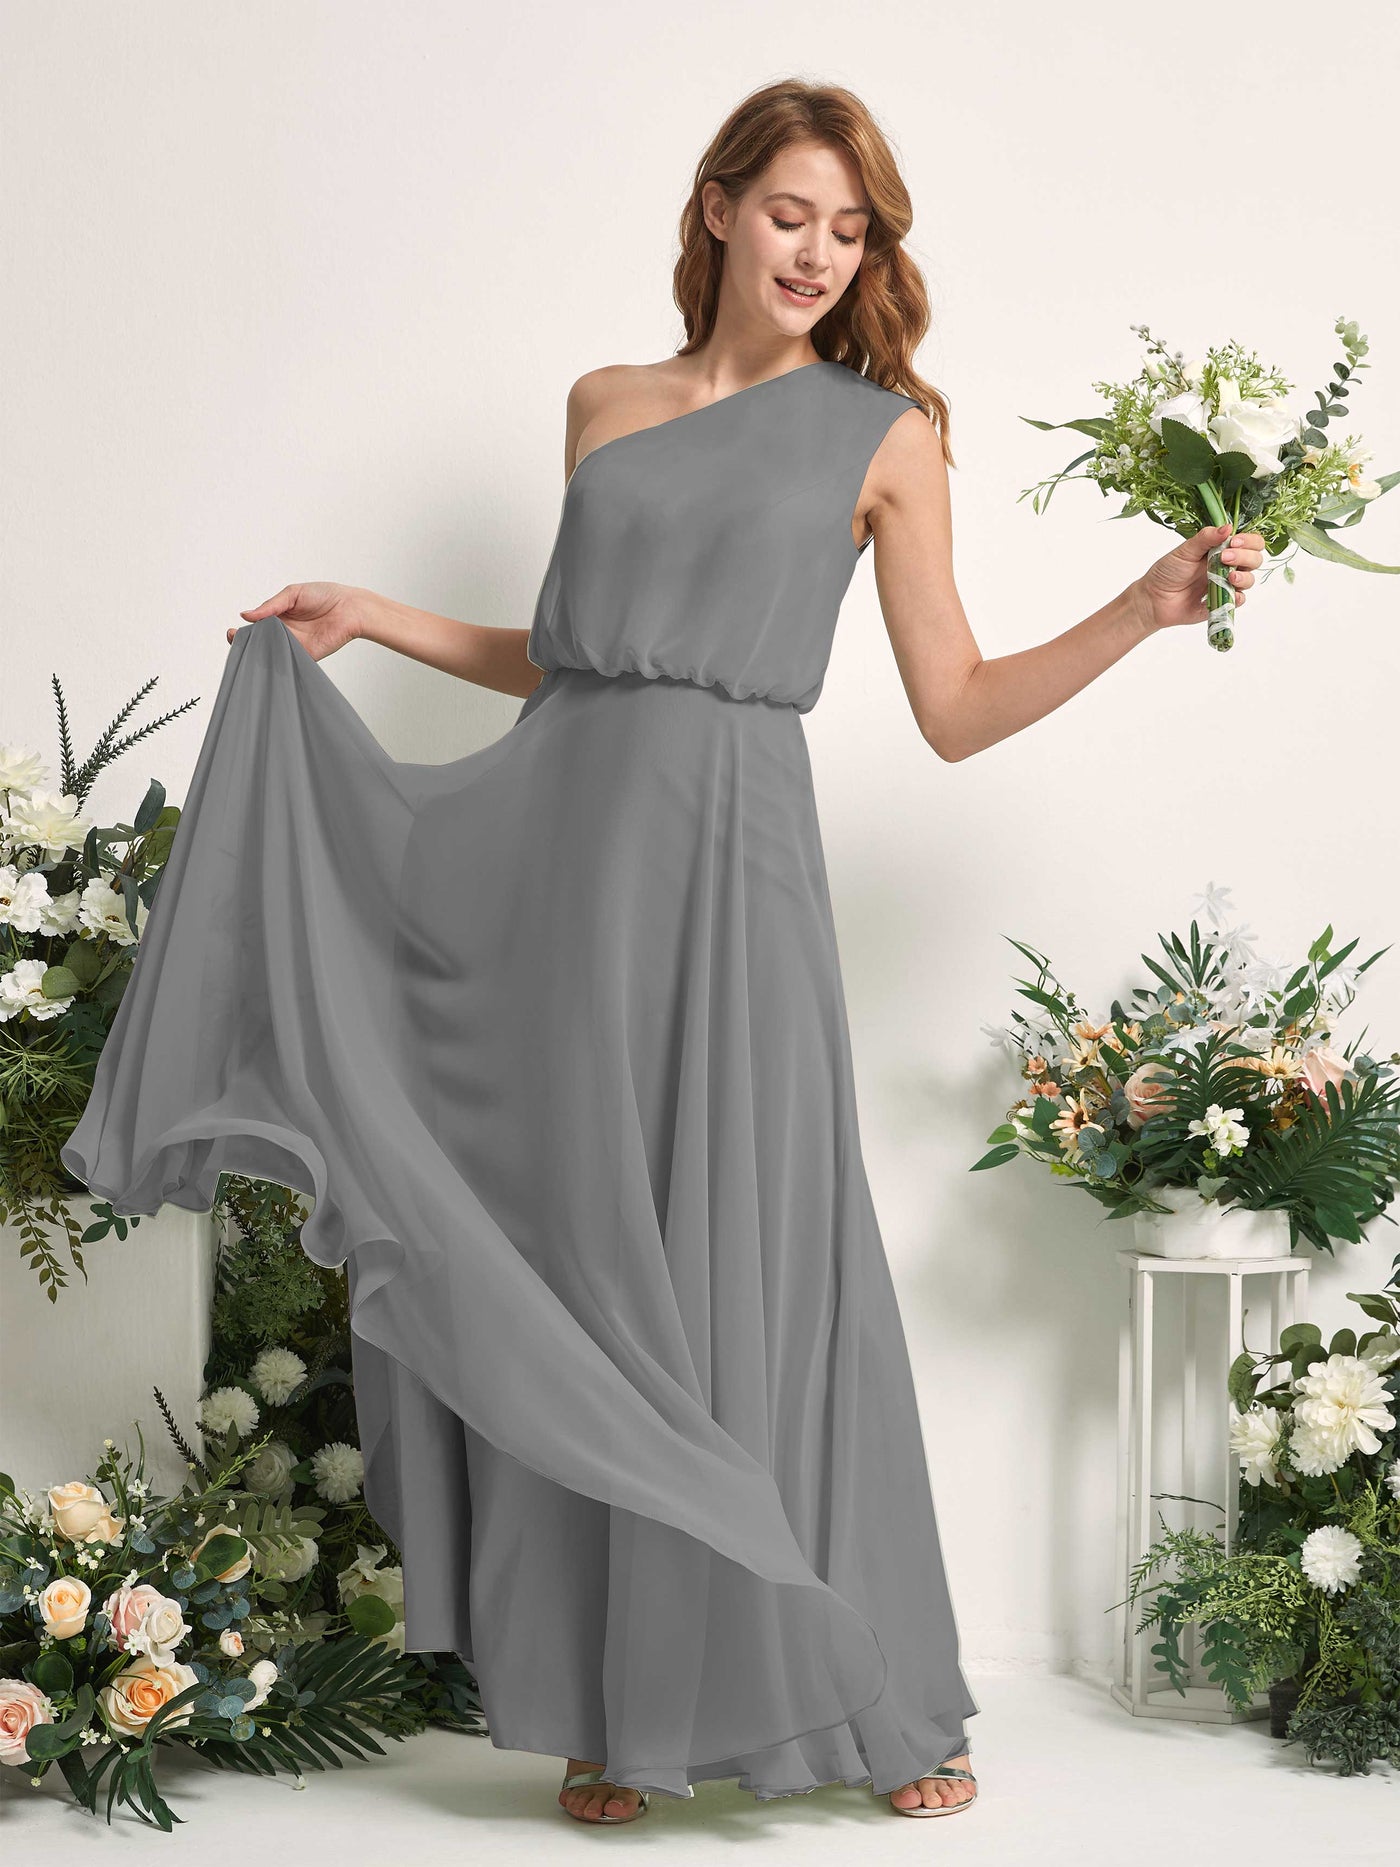 Bridesmaid Dress A-line Chiffon One Shoulder Full Length Sleeveless Wedding Party Dress - Steel Gray (81226820)#color_steel-gray